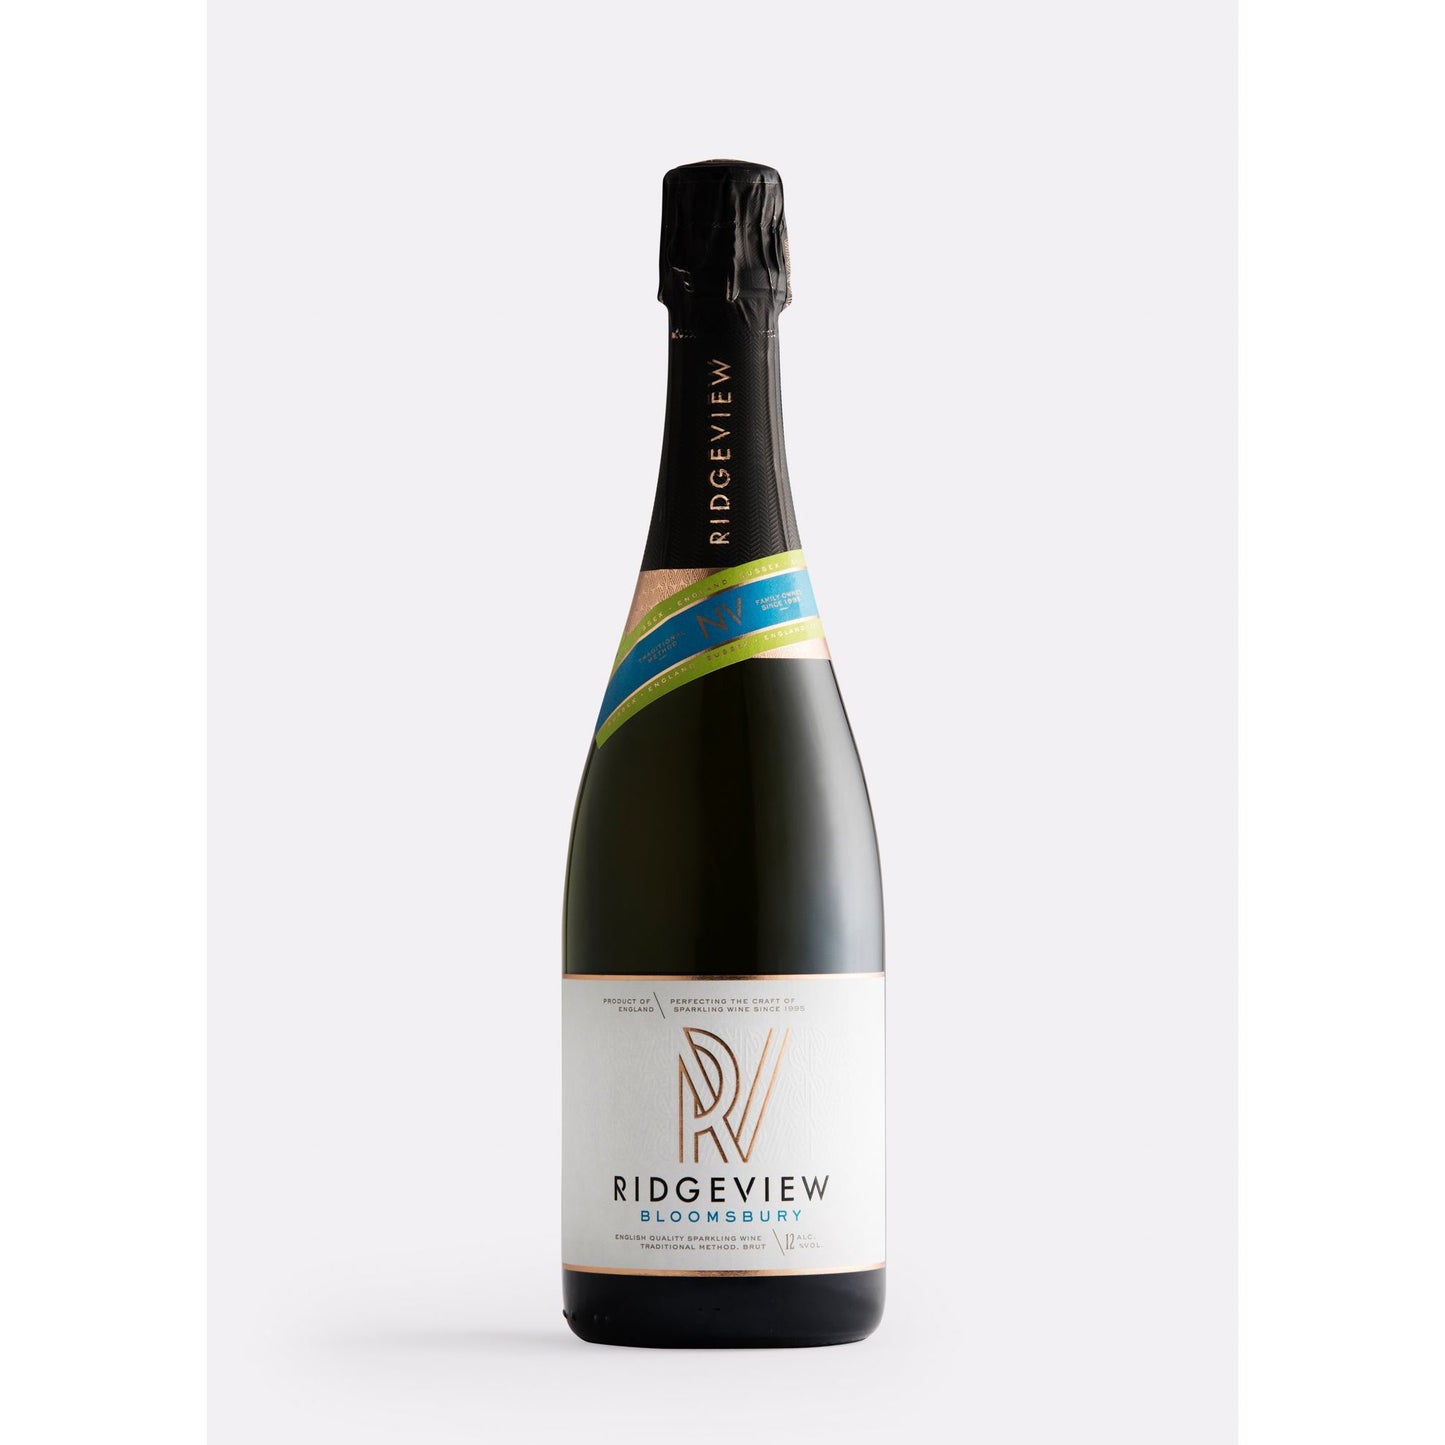 Ridgeview Bloomsbury Sparkling Wine The English Wine Collection